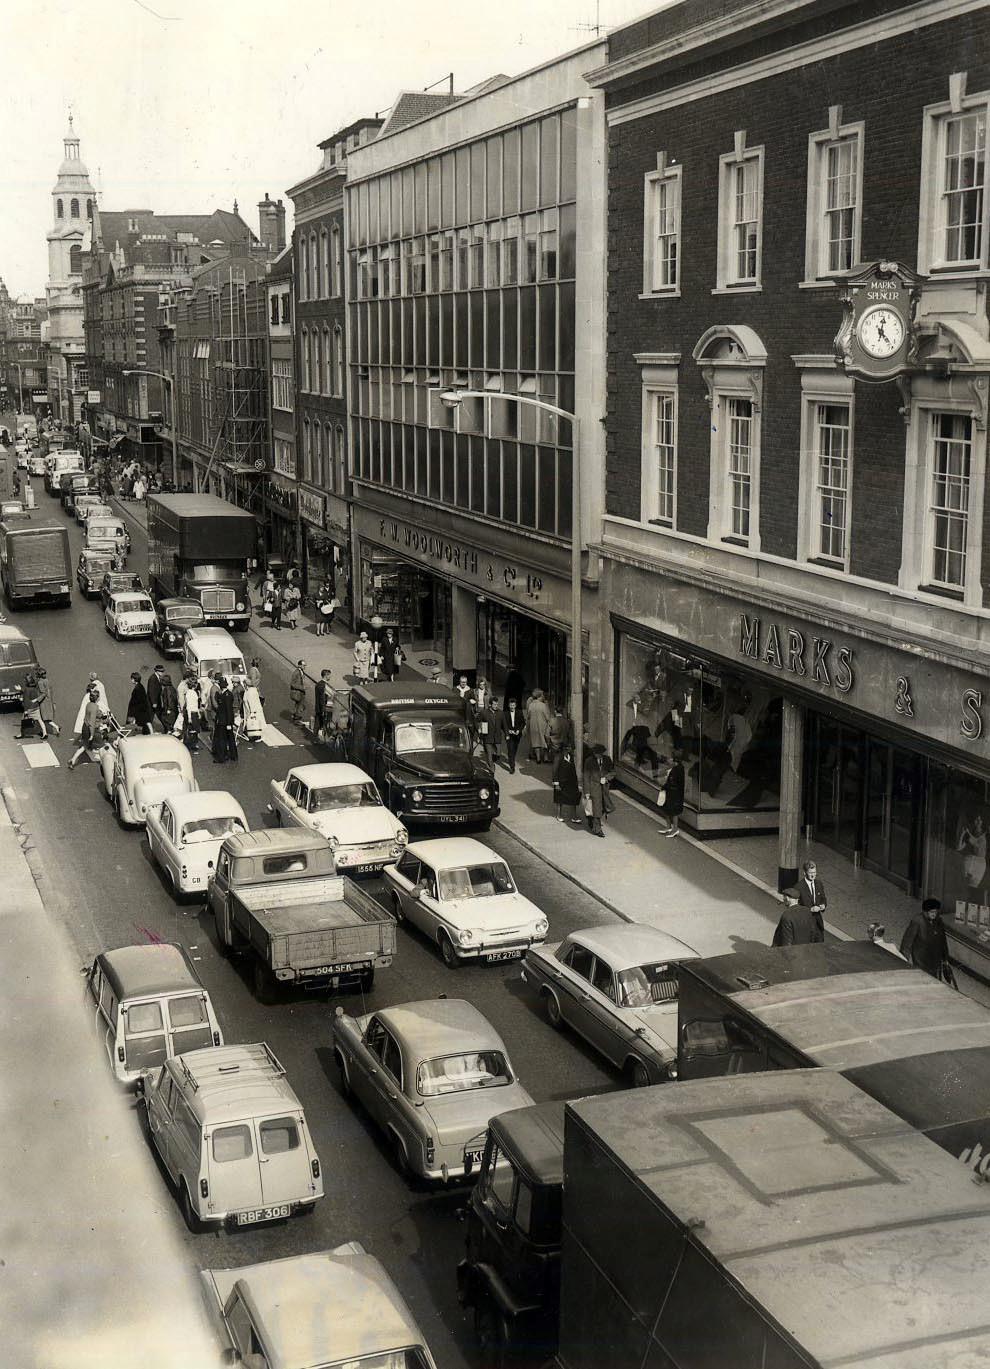 The original Worcester High Street stores of Marks and Spencer